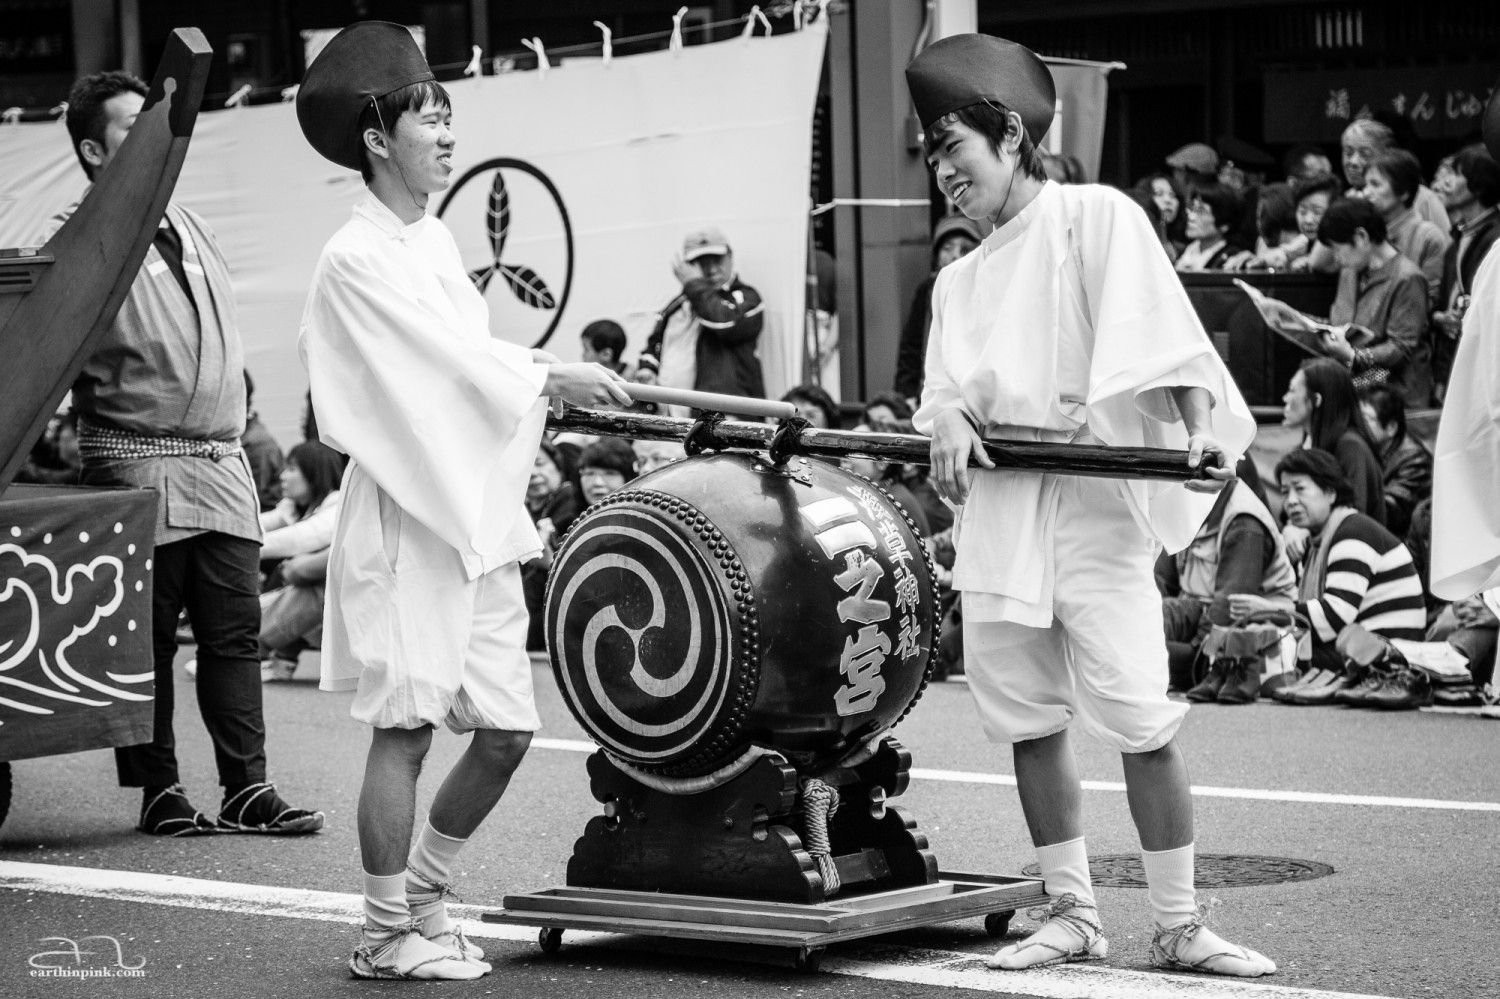 Two boys take a short break from marching during the Culture Day parade in Asakusa.